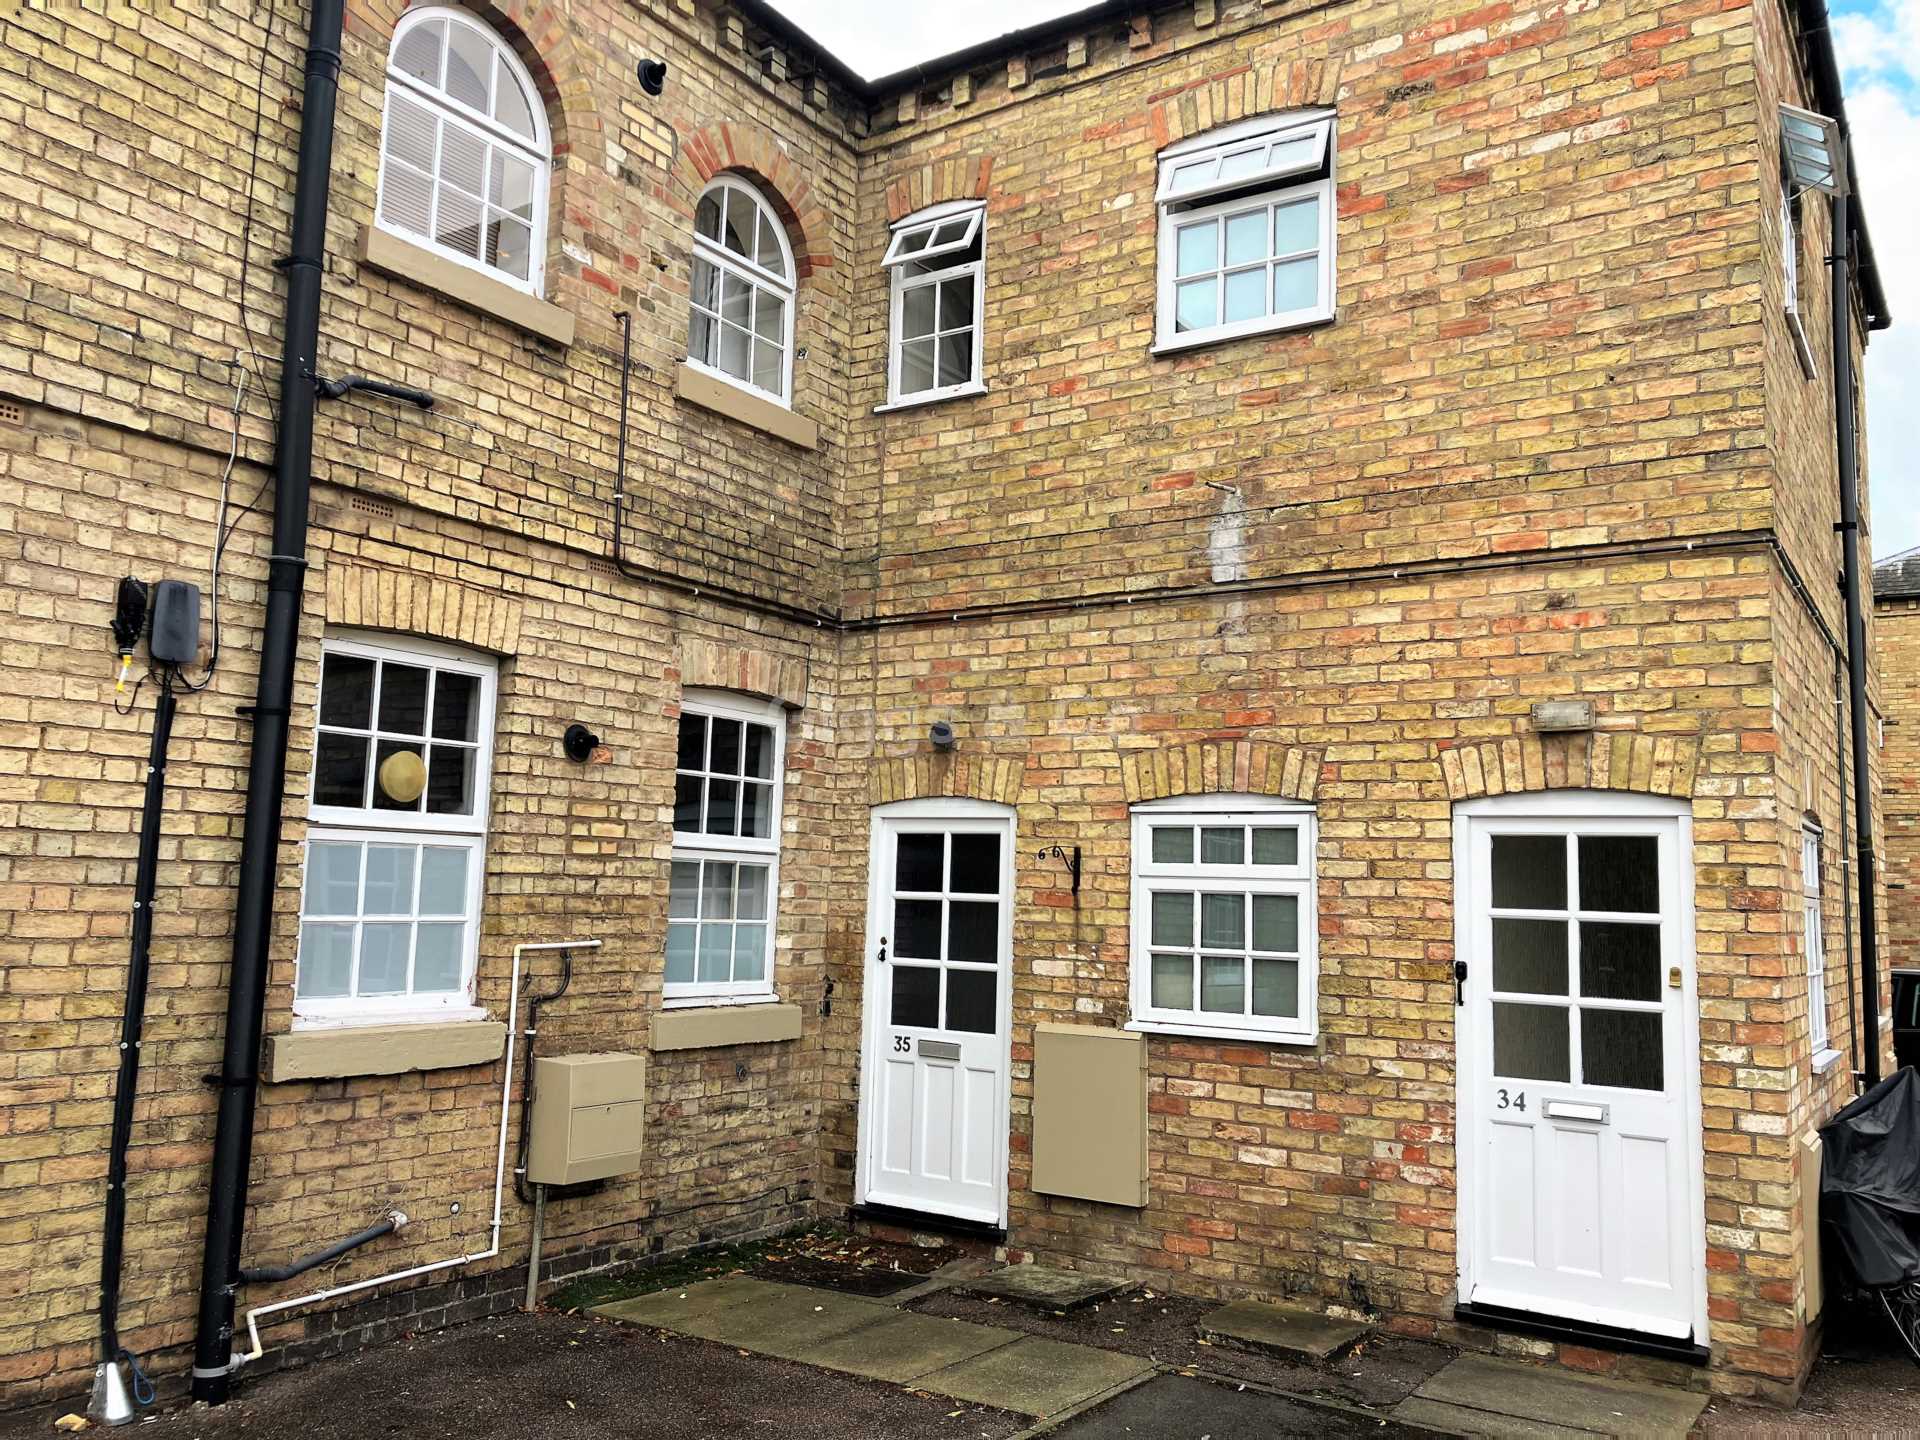 1 bed apartment to rent in Eaton Ford St Neots, PE19